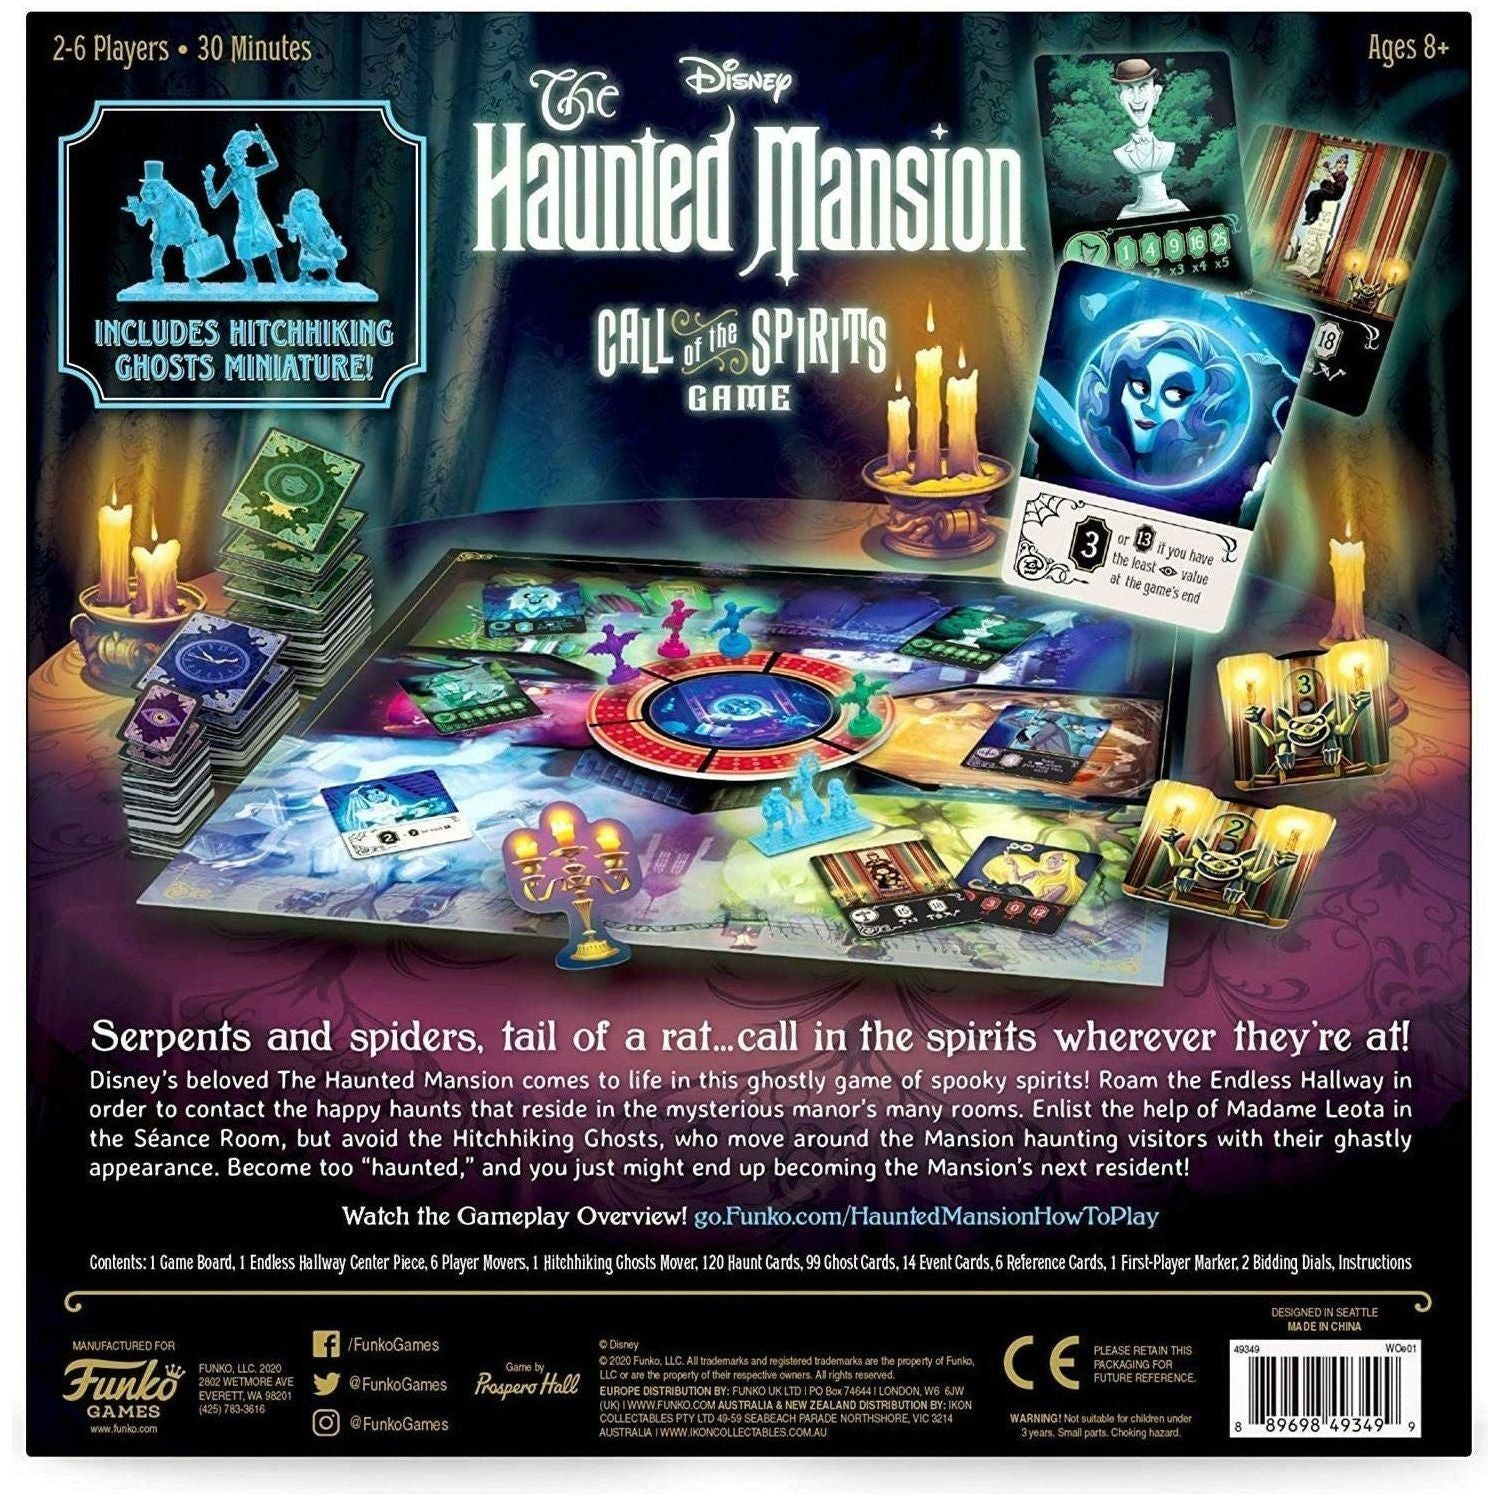 Funko Pop Disney The Haunted Mansion - Call of The Spirits: Disneyland Edition Game - BumbleToys - 18+, Action Figures, Boys, Darth Vader, Funko, OXE, Pre-Order, star wars